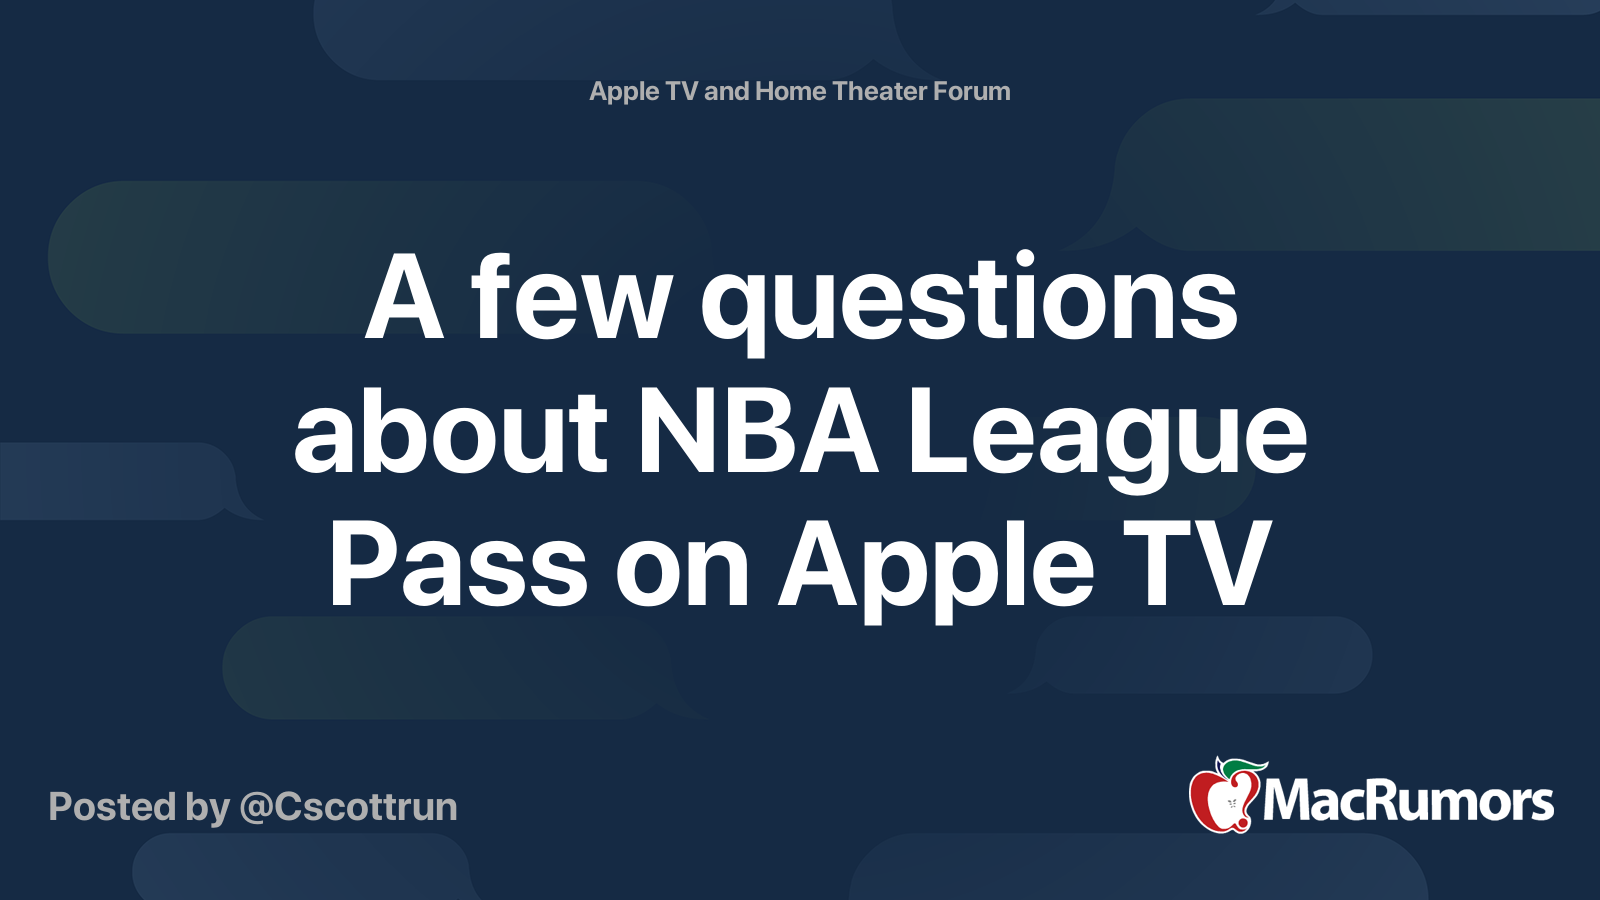 A few questions about League Pass on Apple TV | Forums